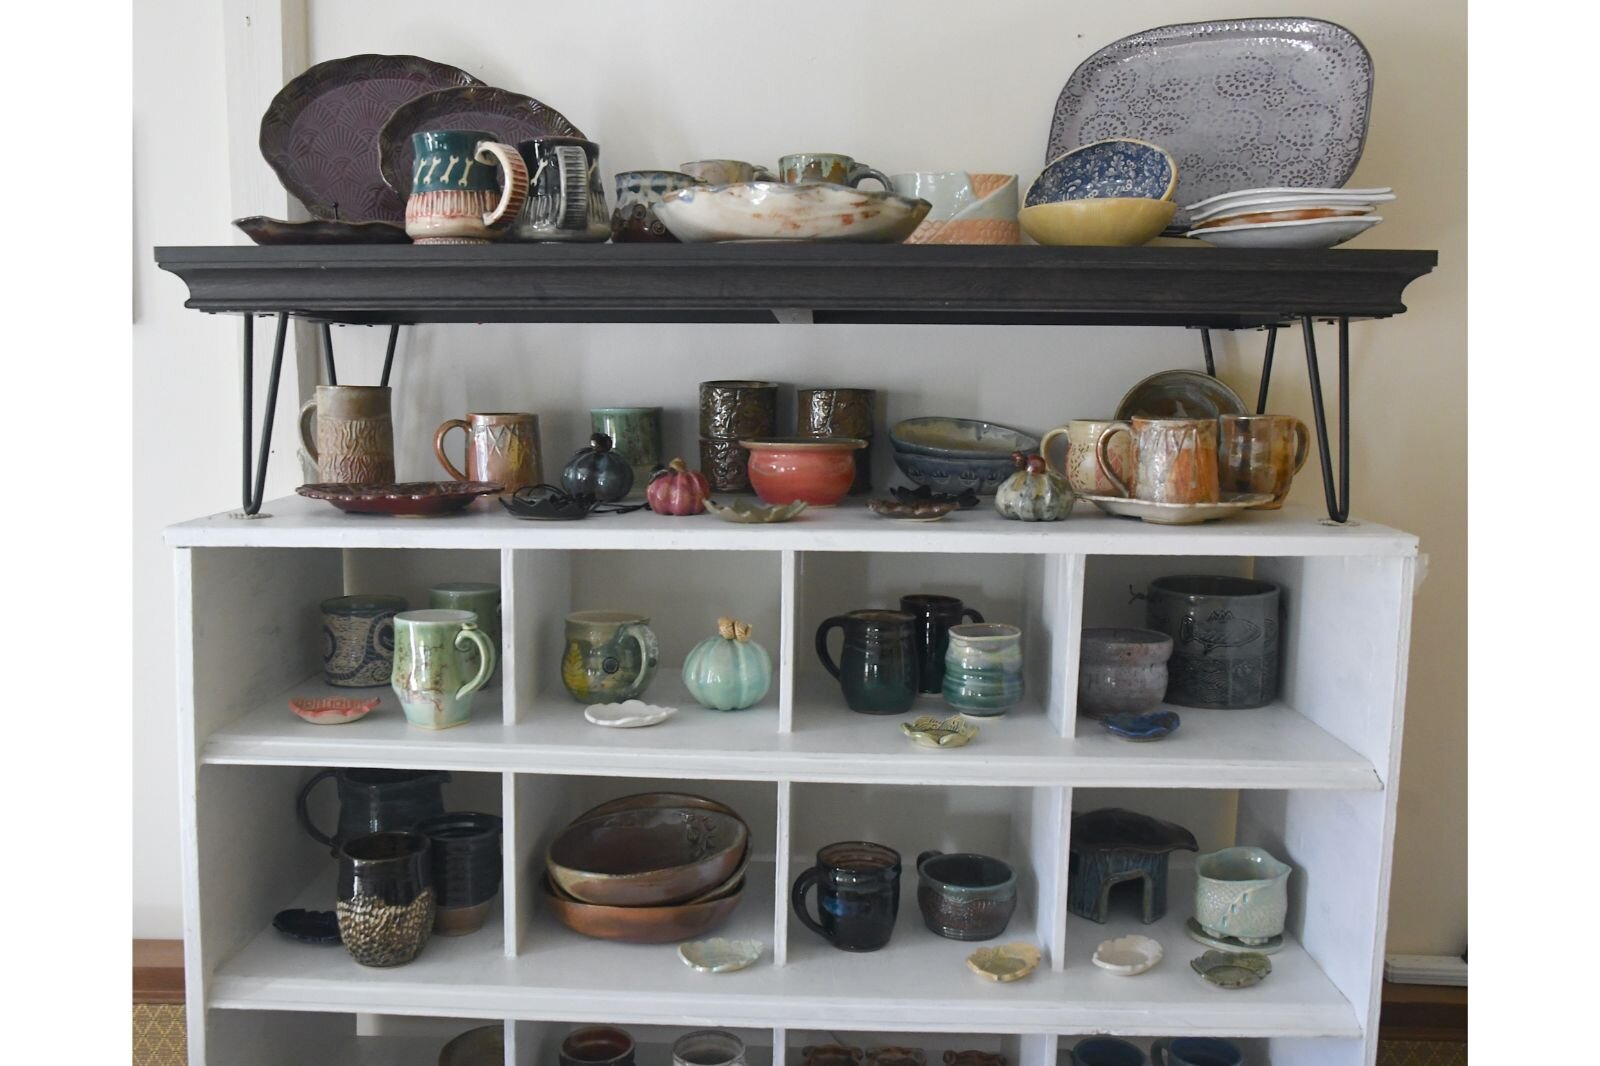 A shelf in Laura’s work area holds a variety of her creations.